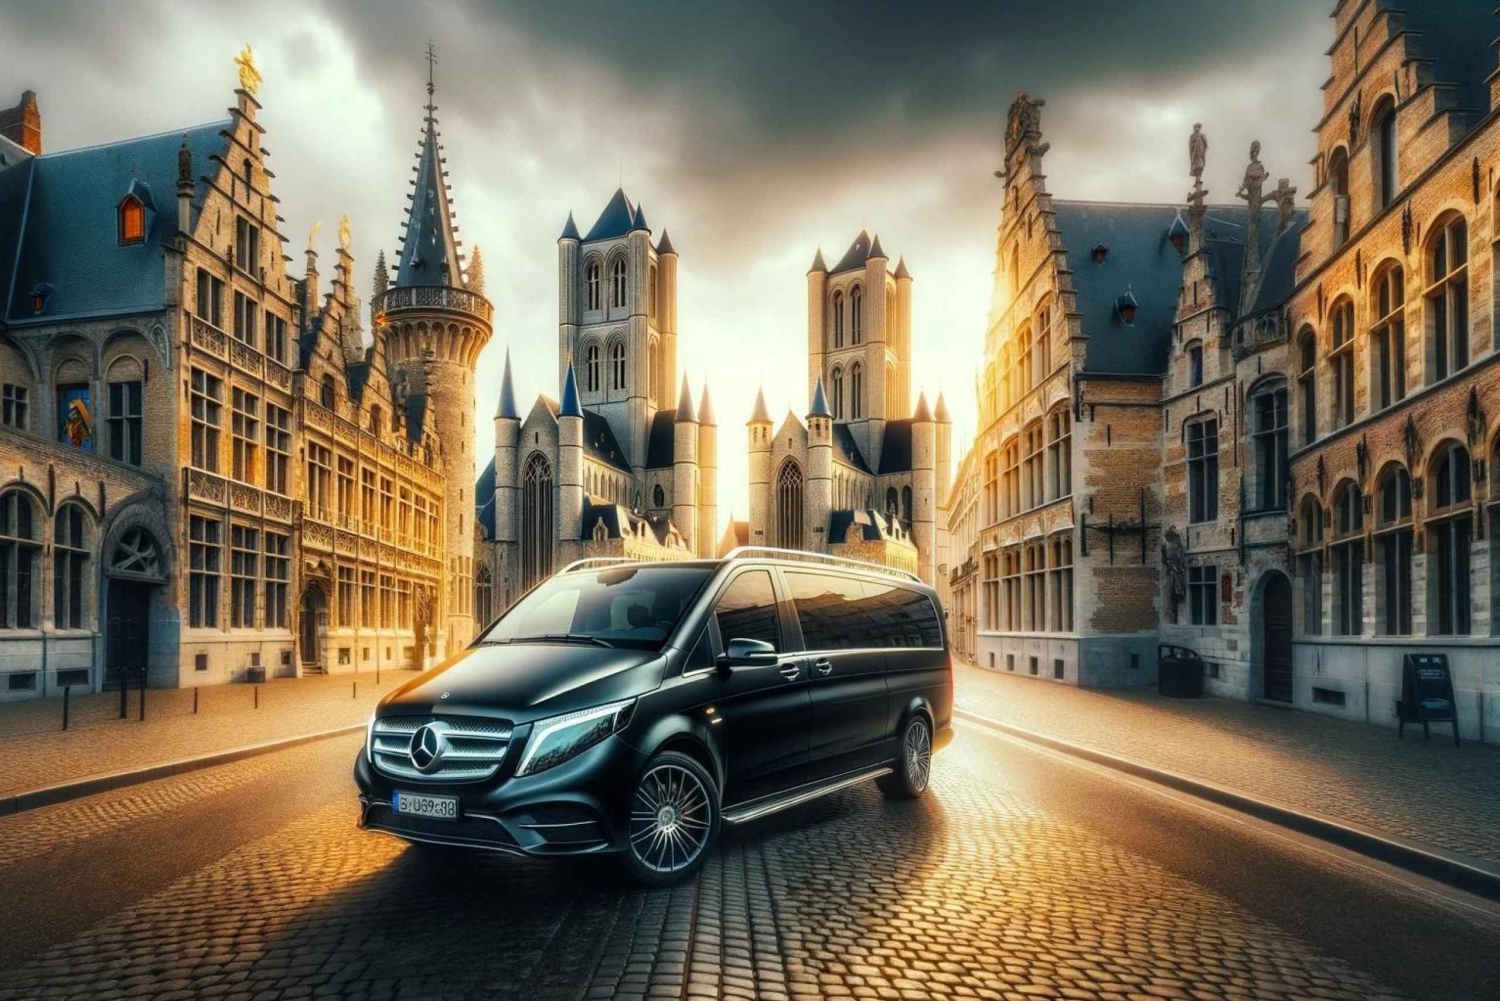 From Amsterdam: to Ghent - Private Driver - Luxury Car